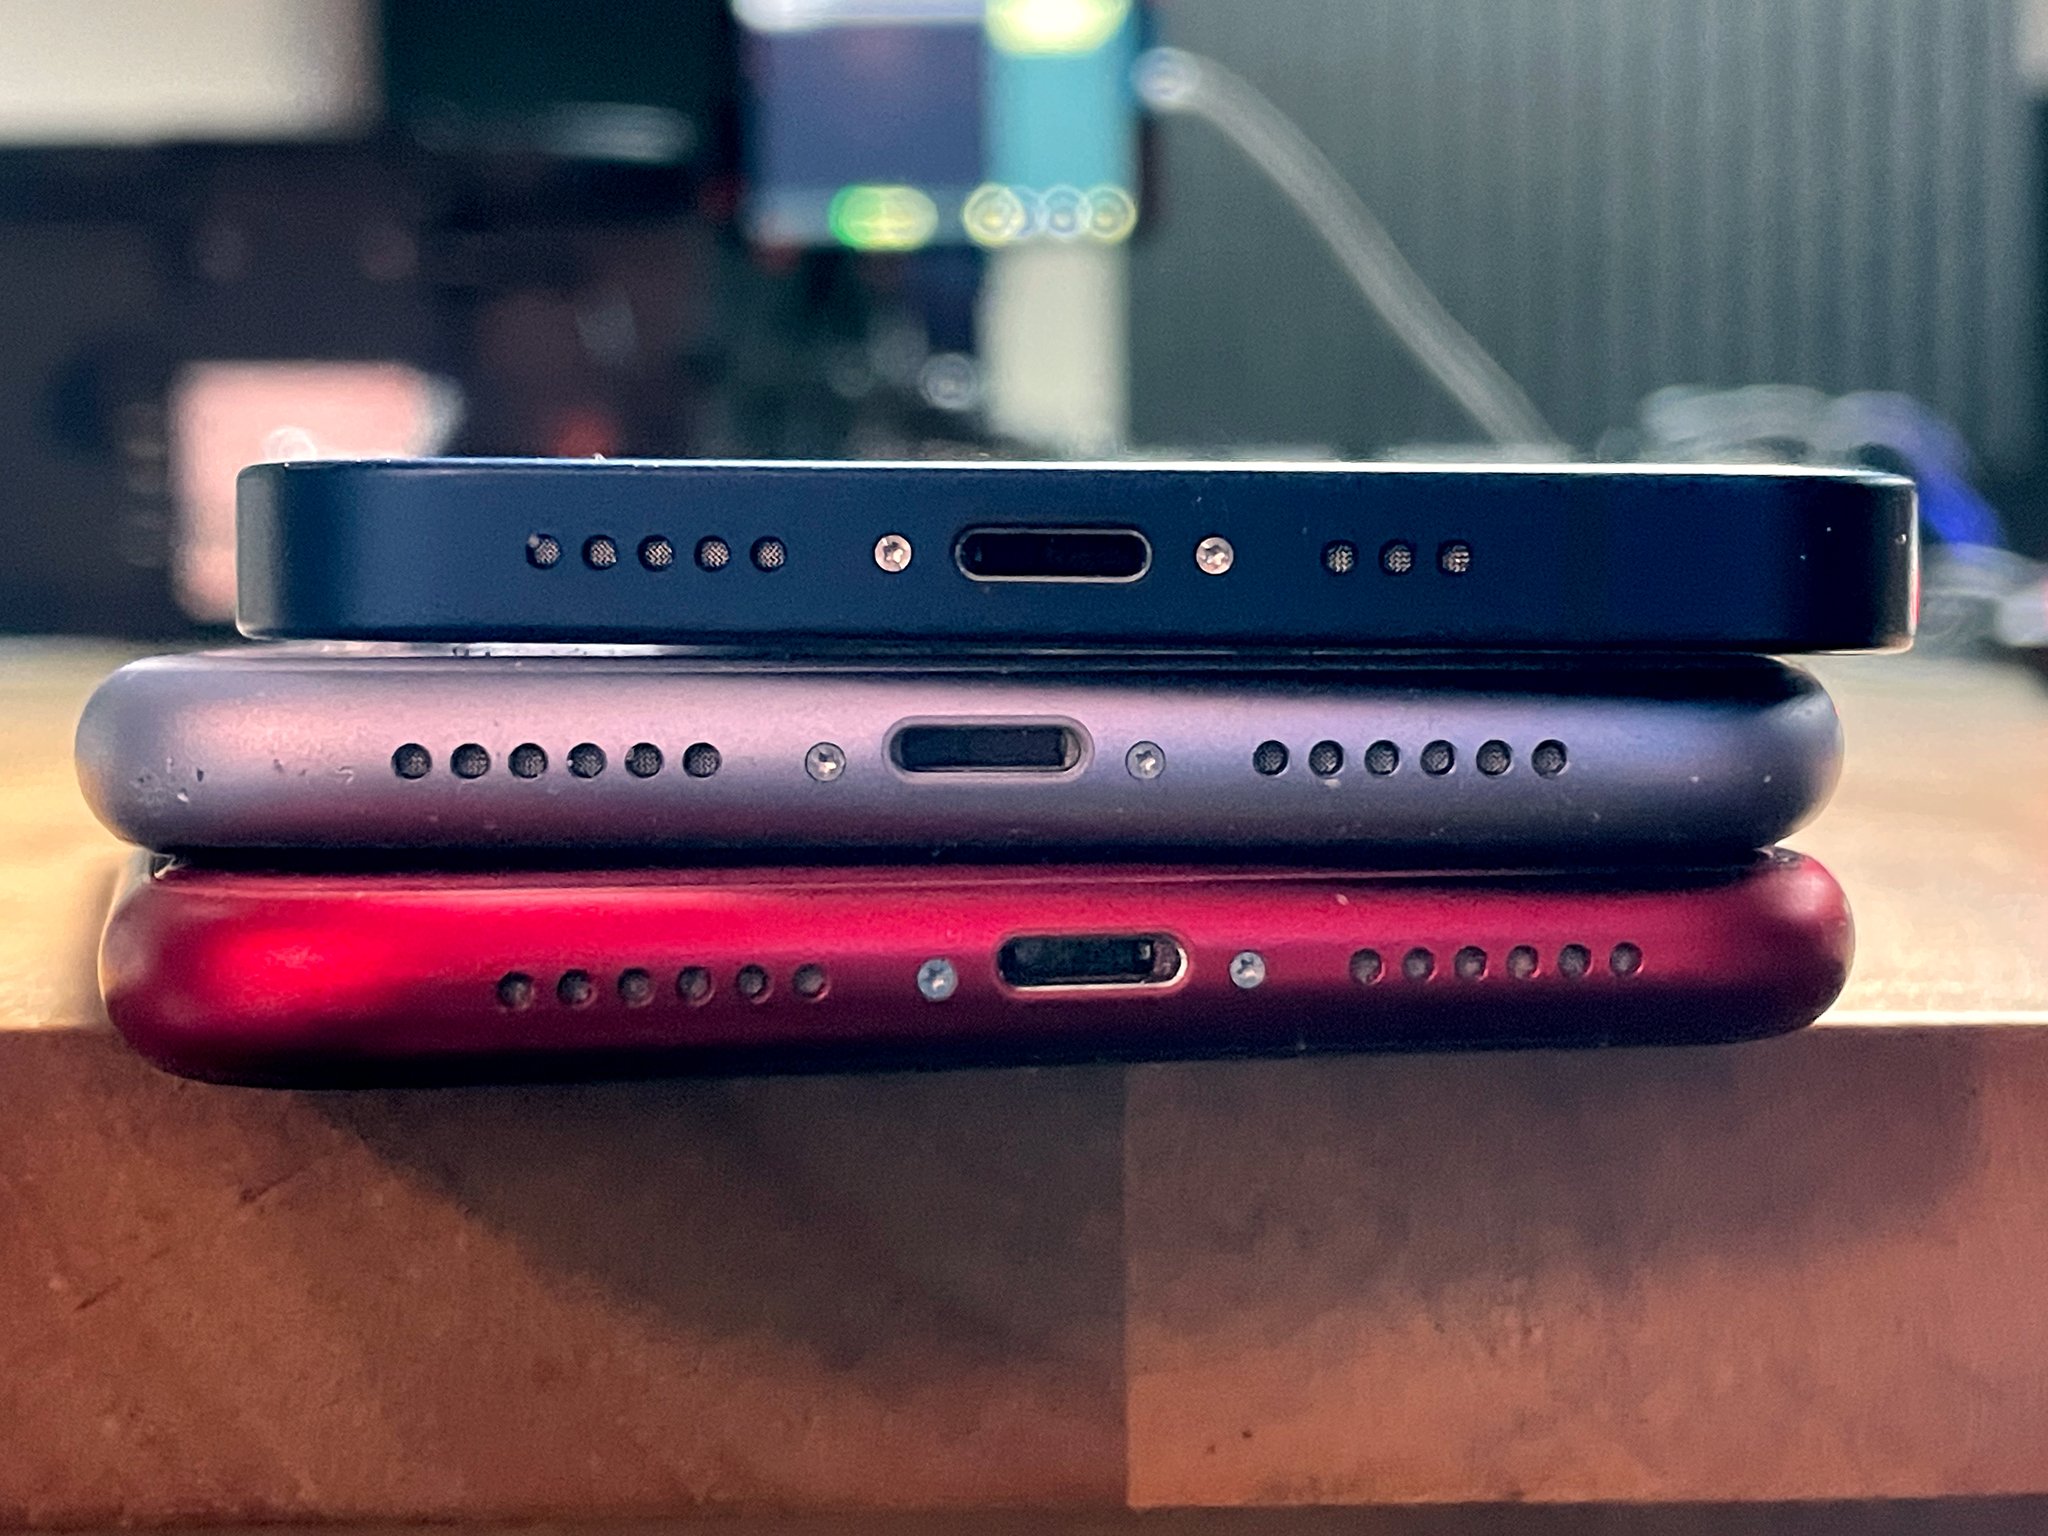 Apple’s new 35W dual-port USB-C chargers use smarts to adjust power based on what you plug in